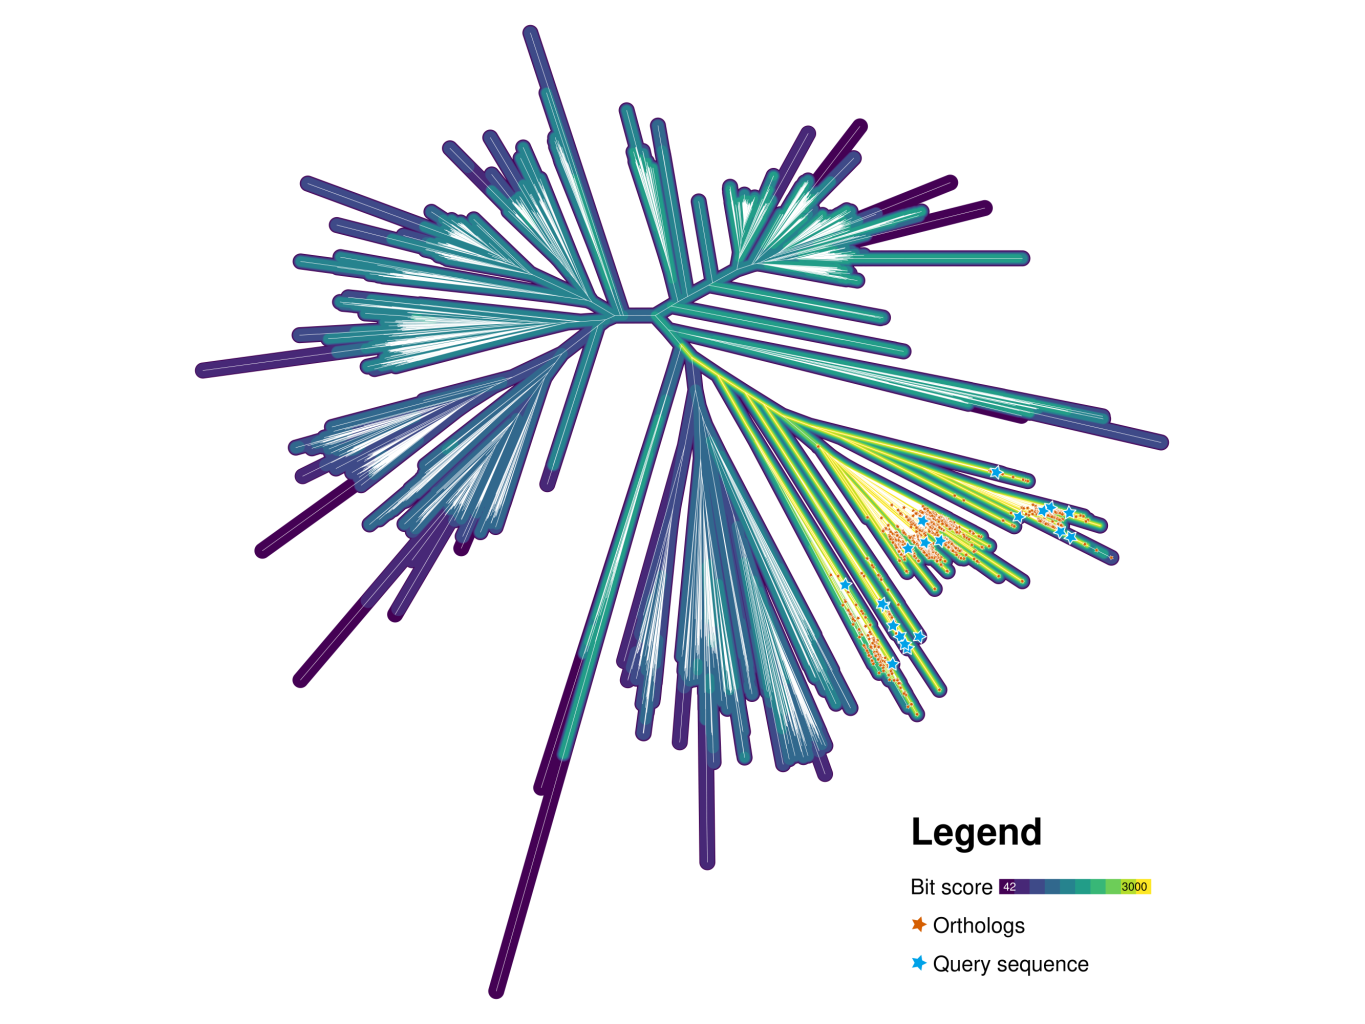 BLAST scores in thousands of genomes